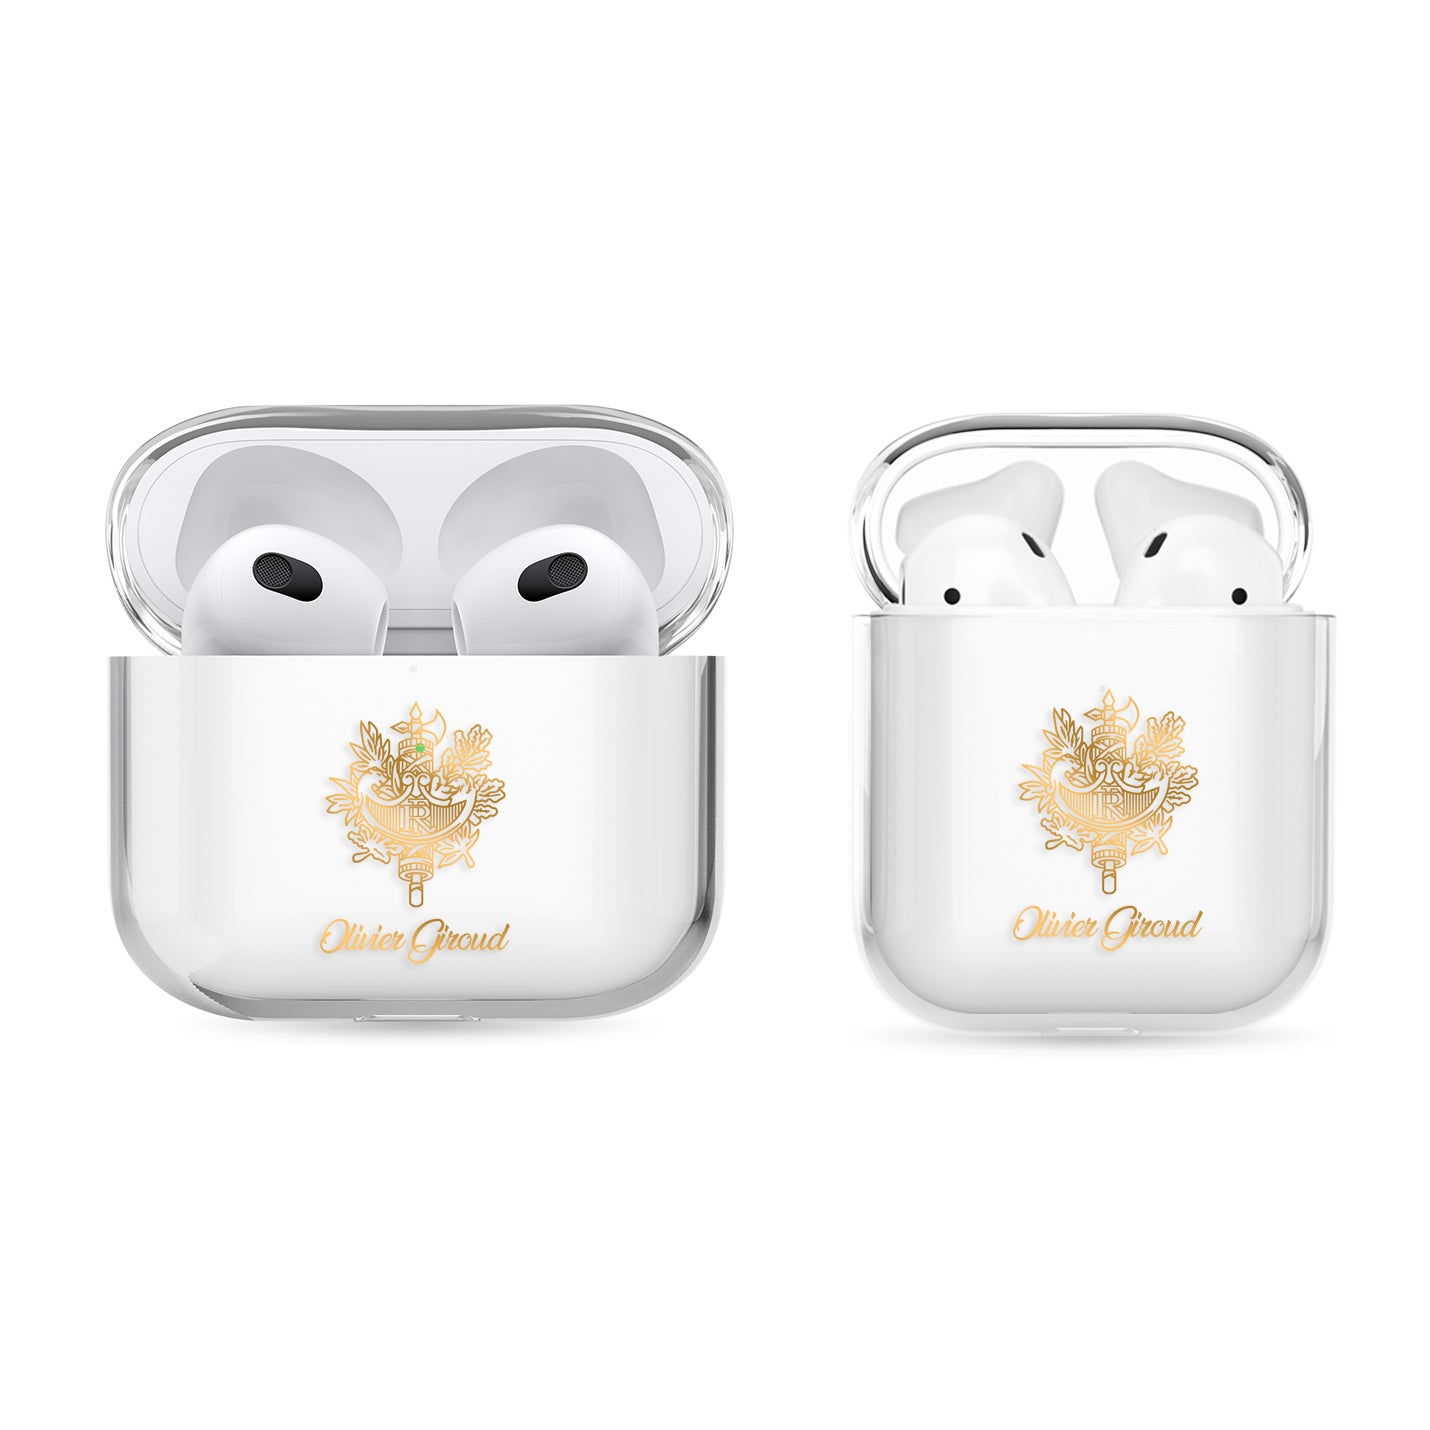 Airpods Hülle - Frankreich - 1instaphone